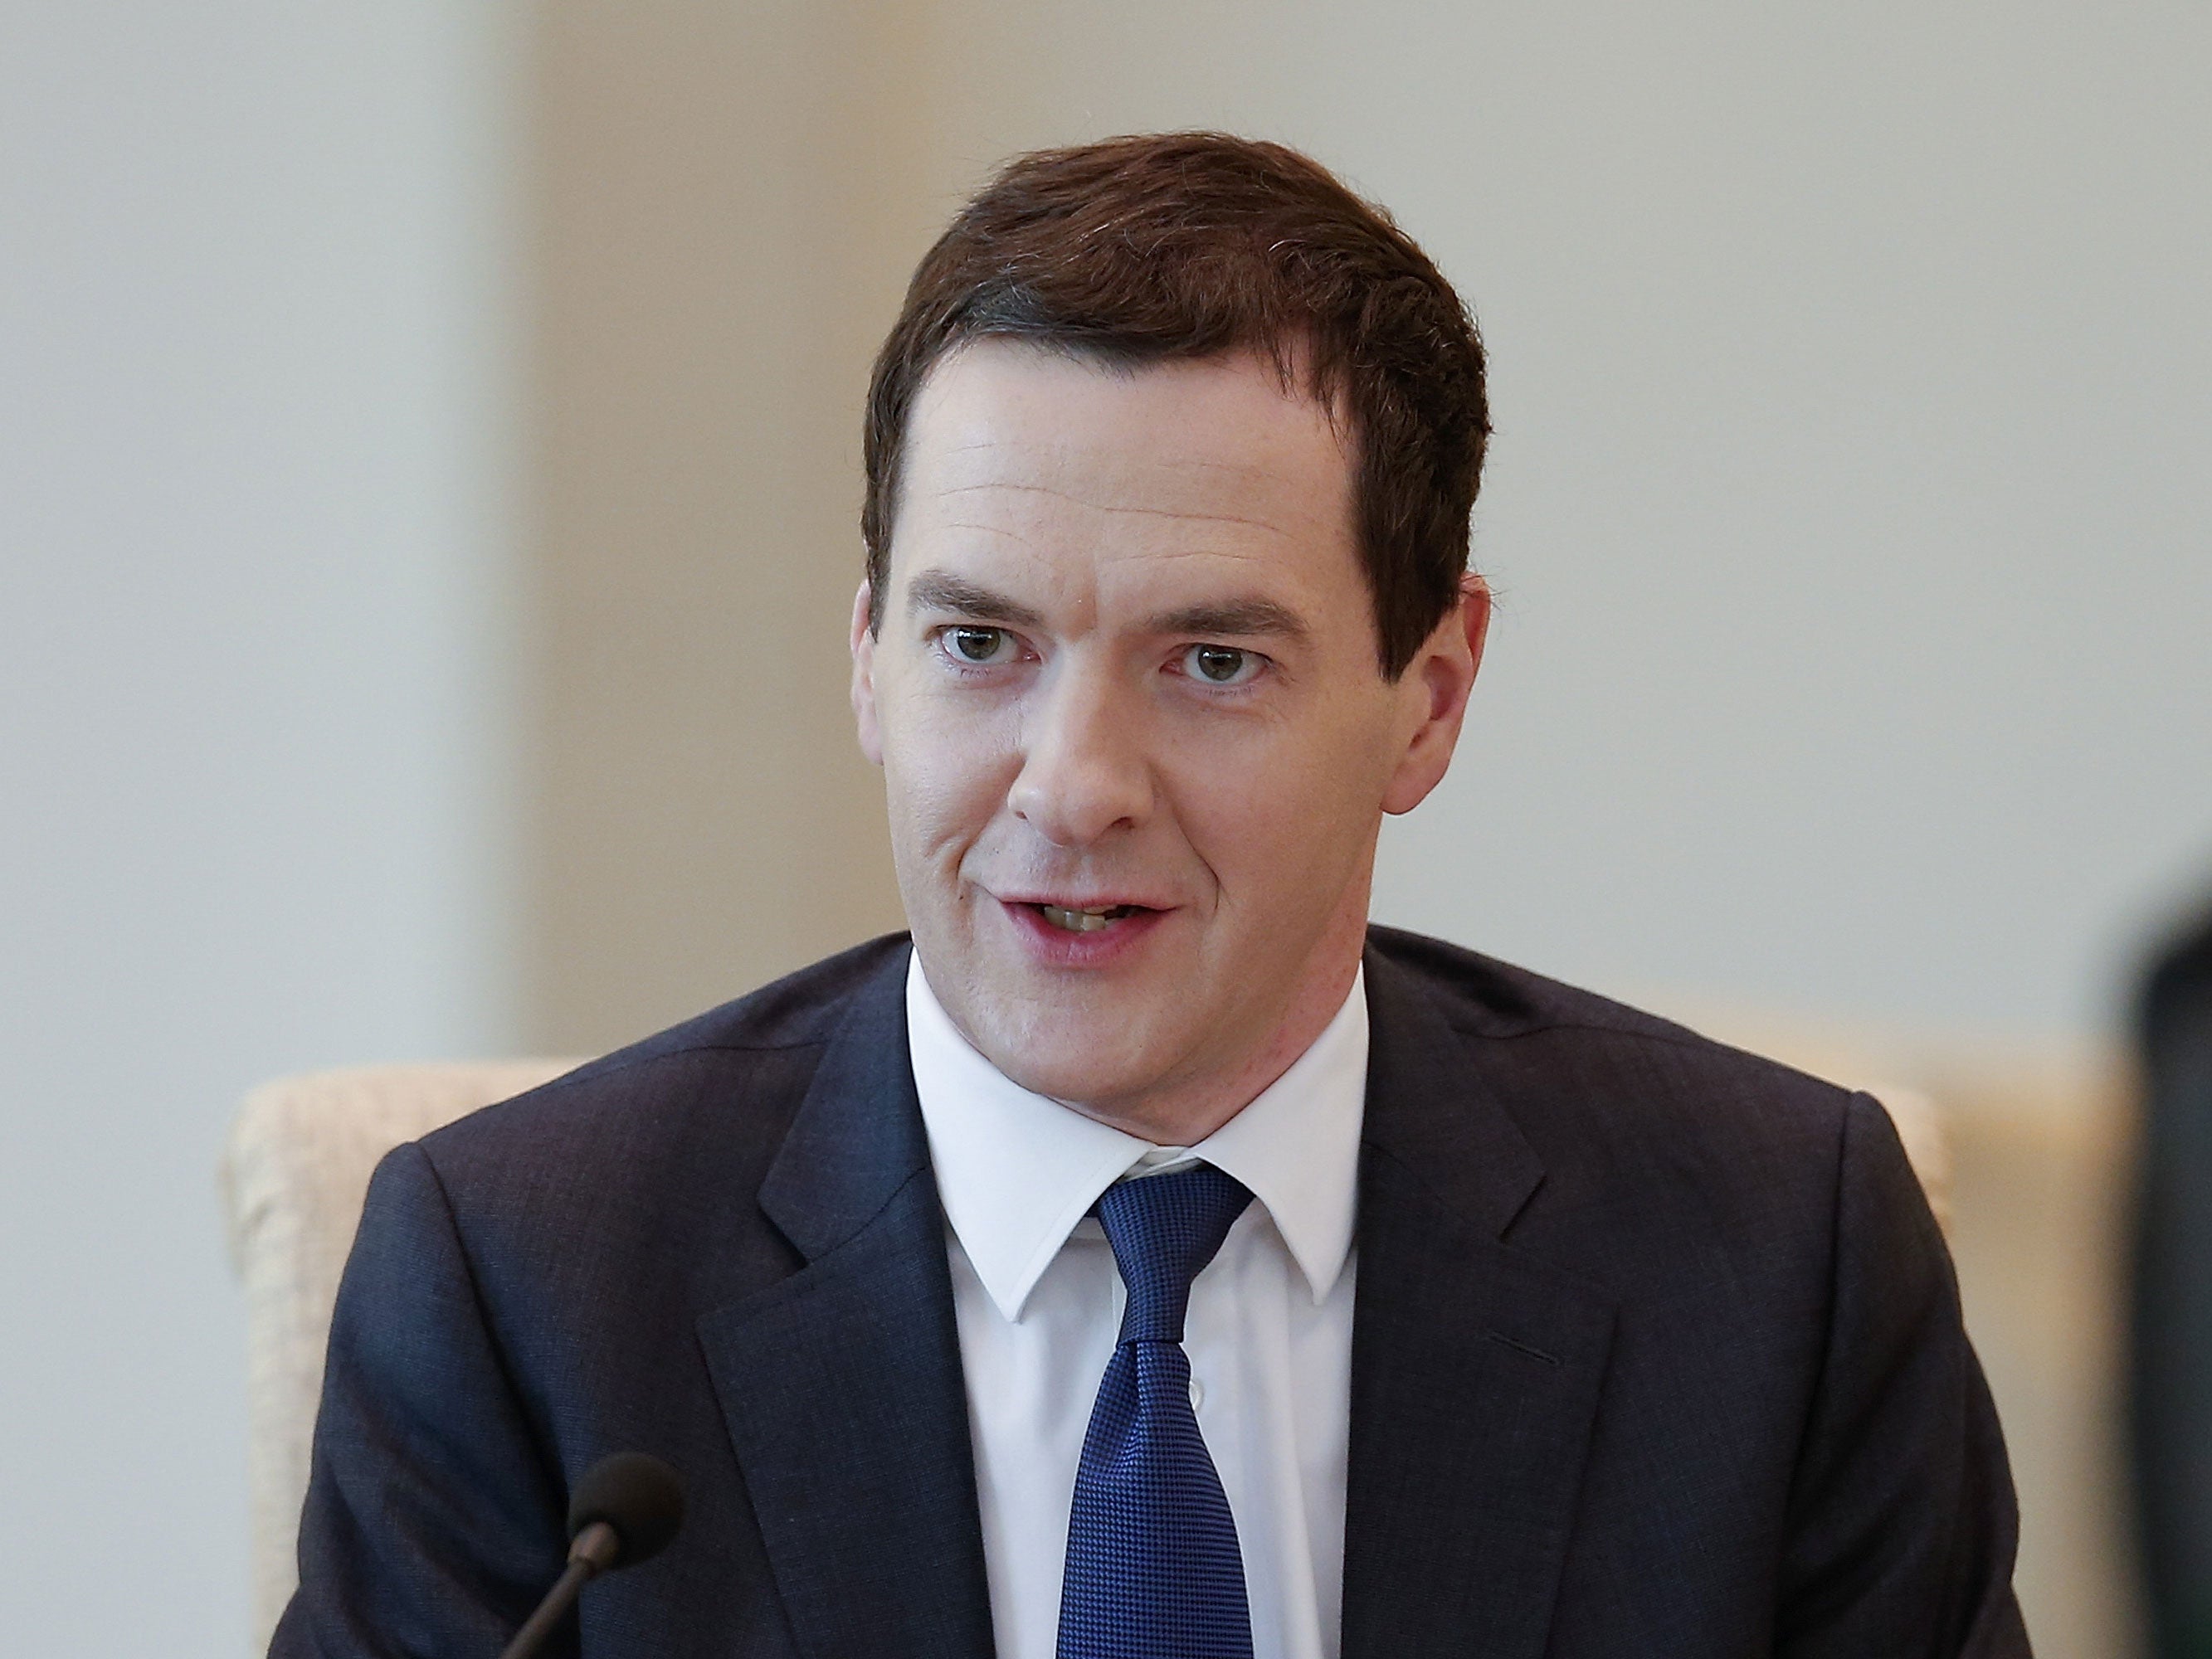 The Chancellor said he would "face up to" the prospect of a leadership run when the PM quits